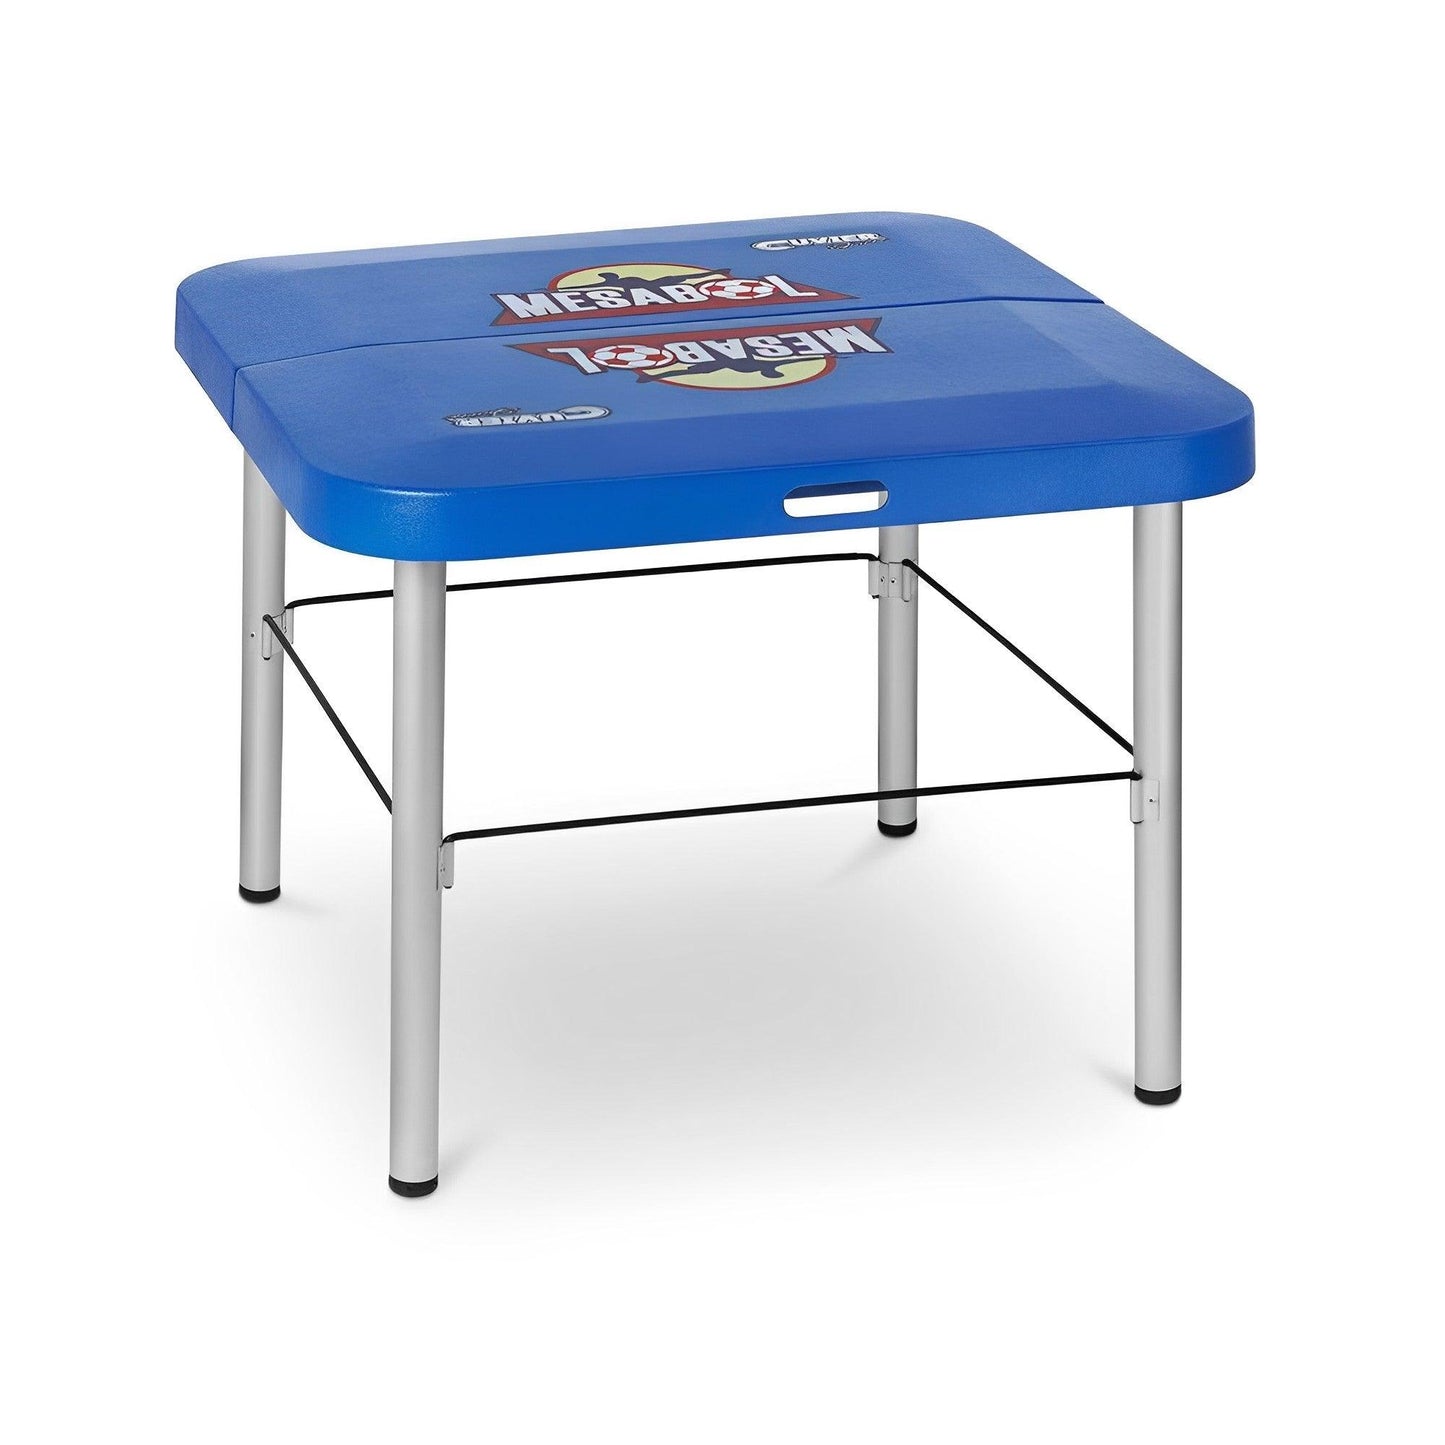 Cuvier Sports Mesabol Pro - Football Soccer Table For Practicing The Teqball Sport - Brazilian Shop